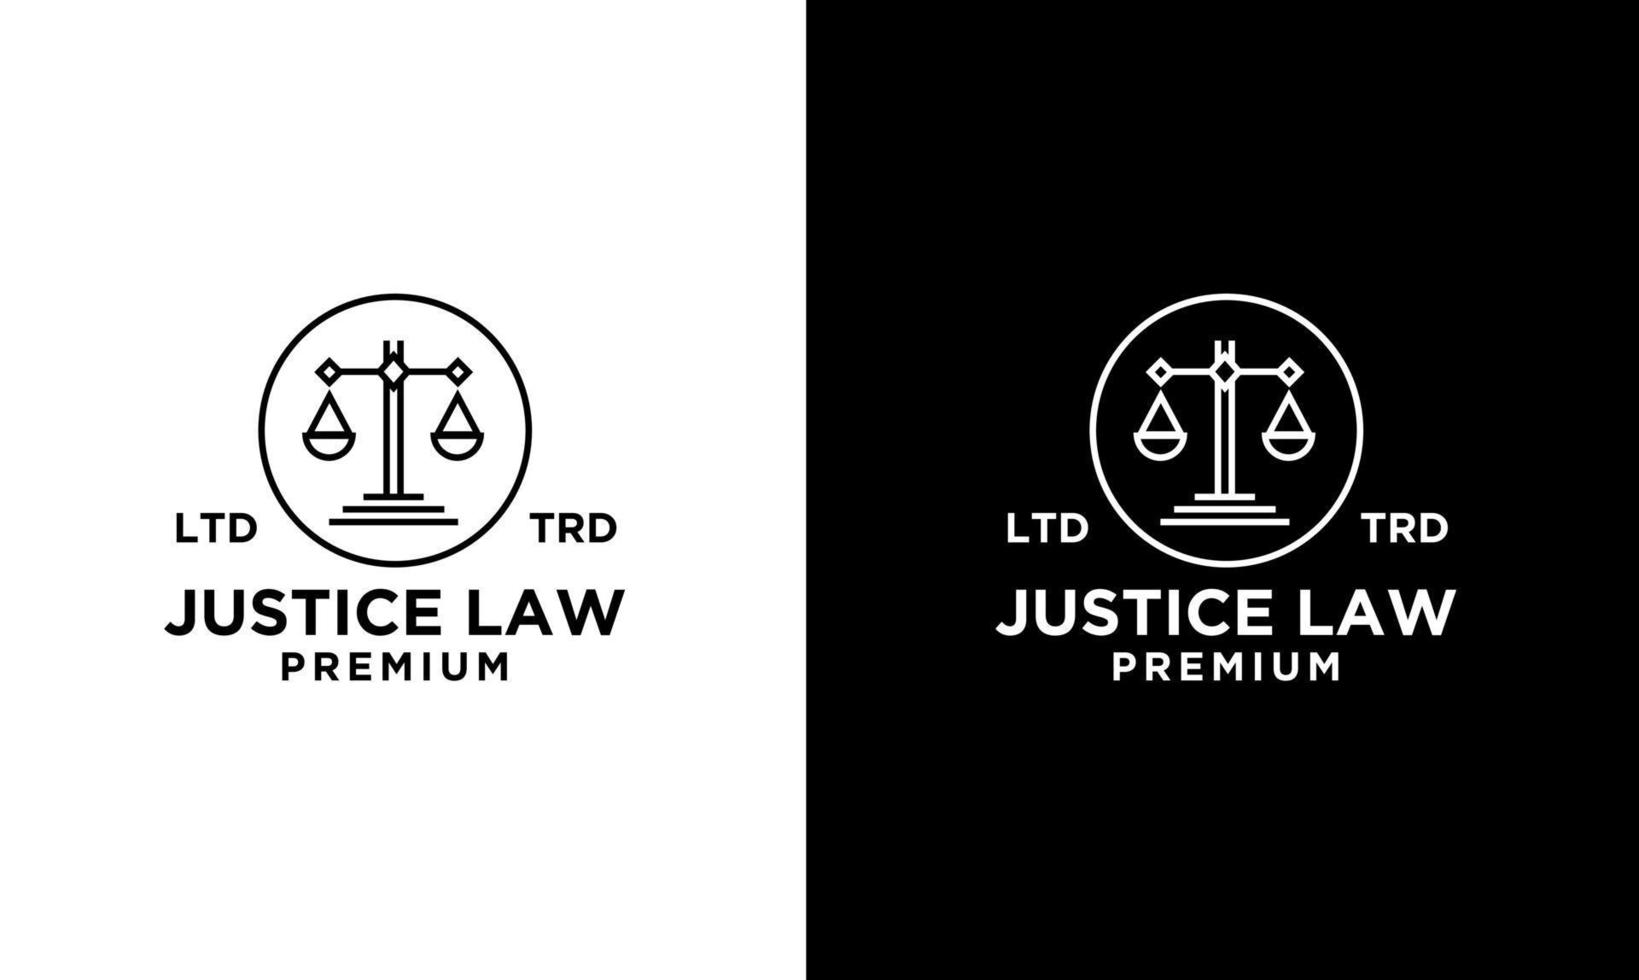 cyber justice law firm logo icon design vector